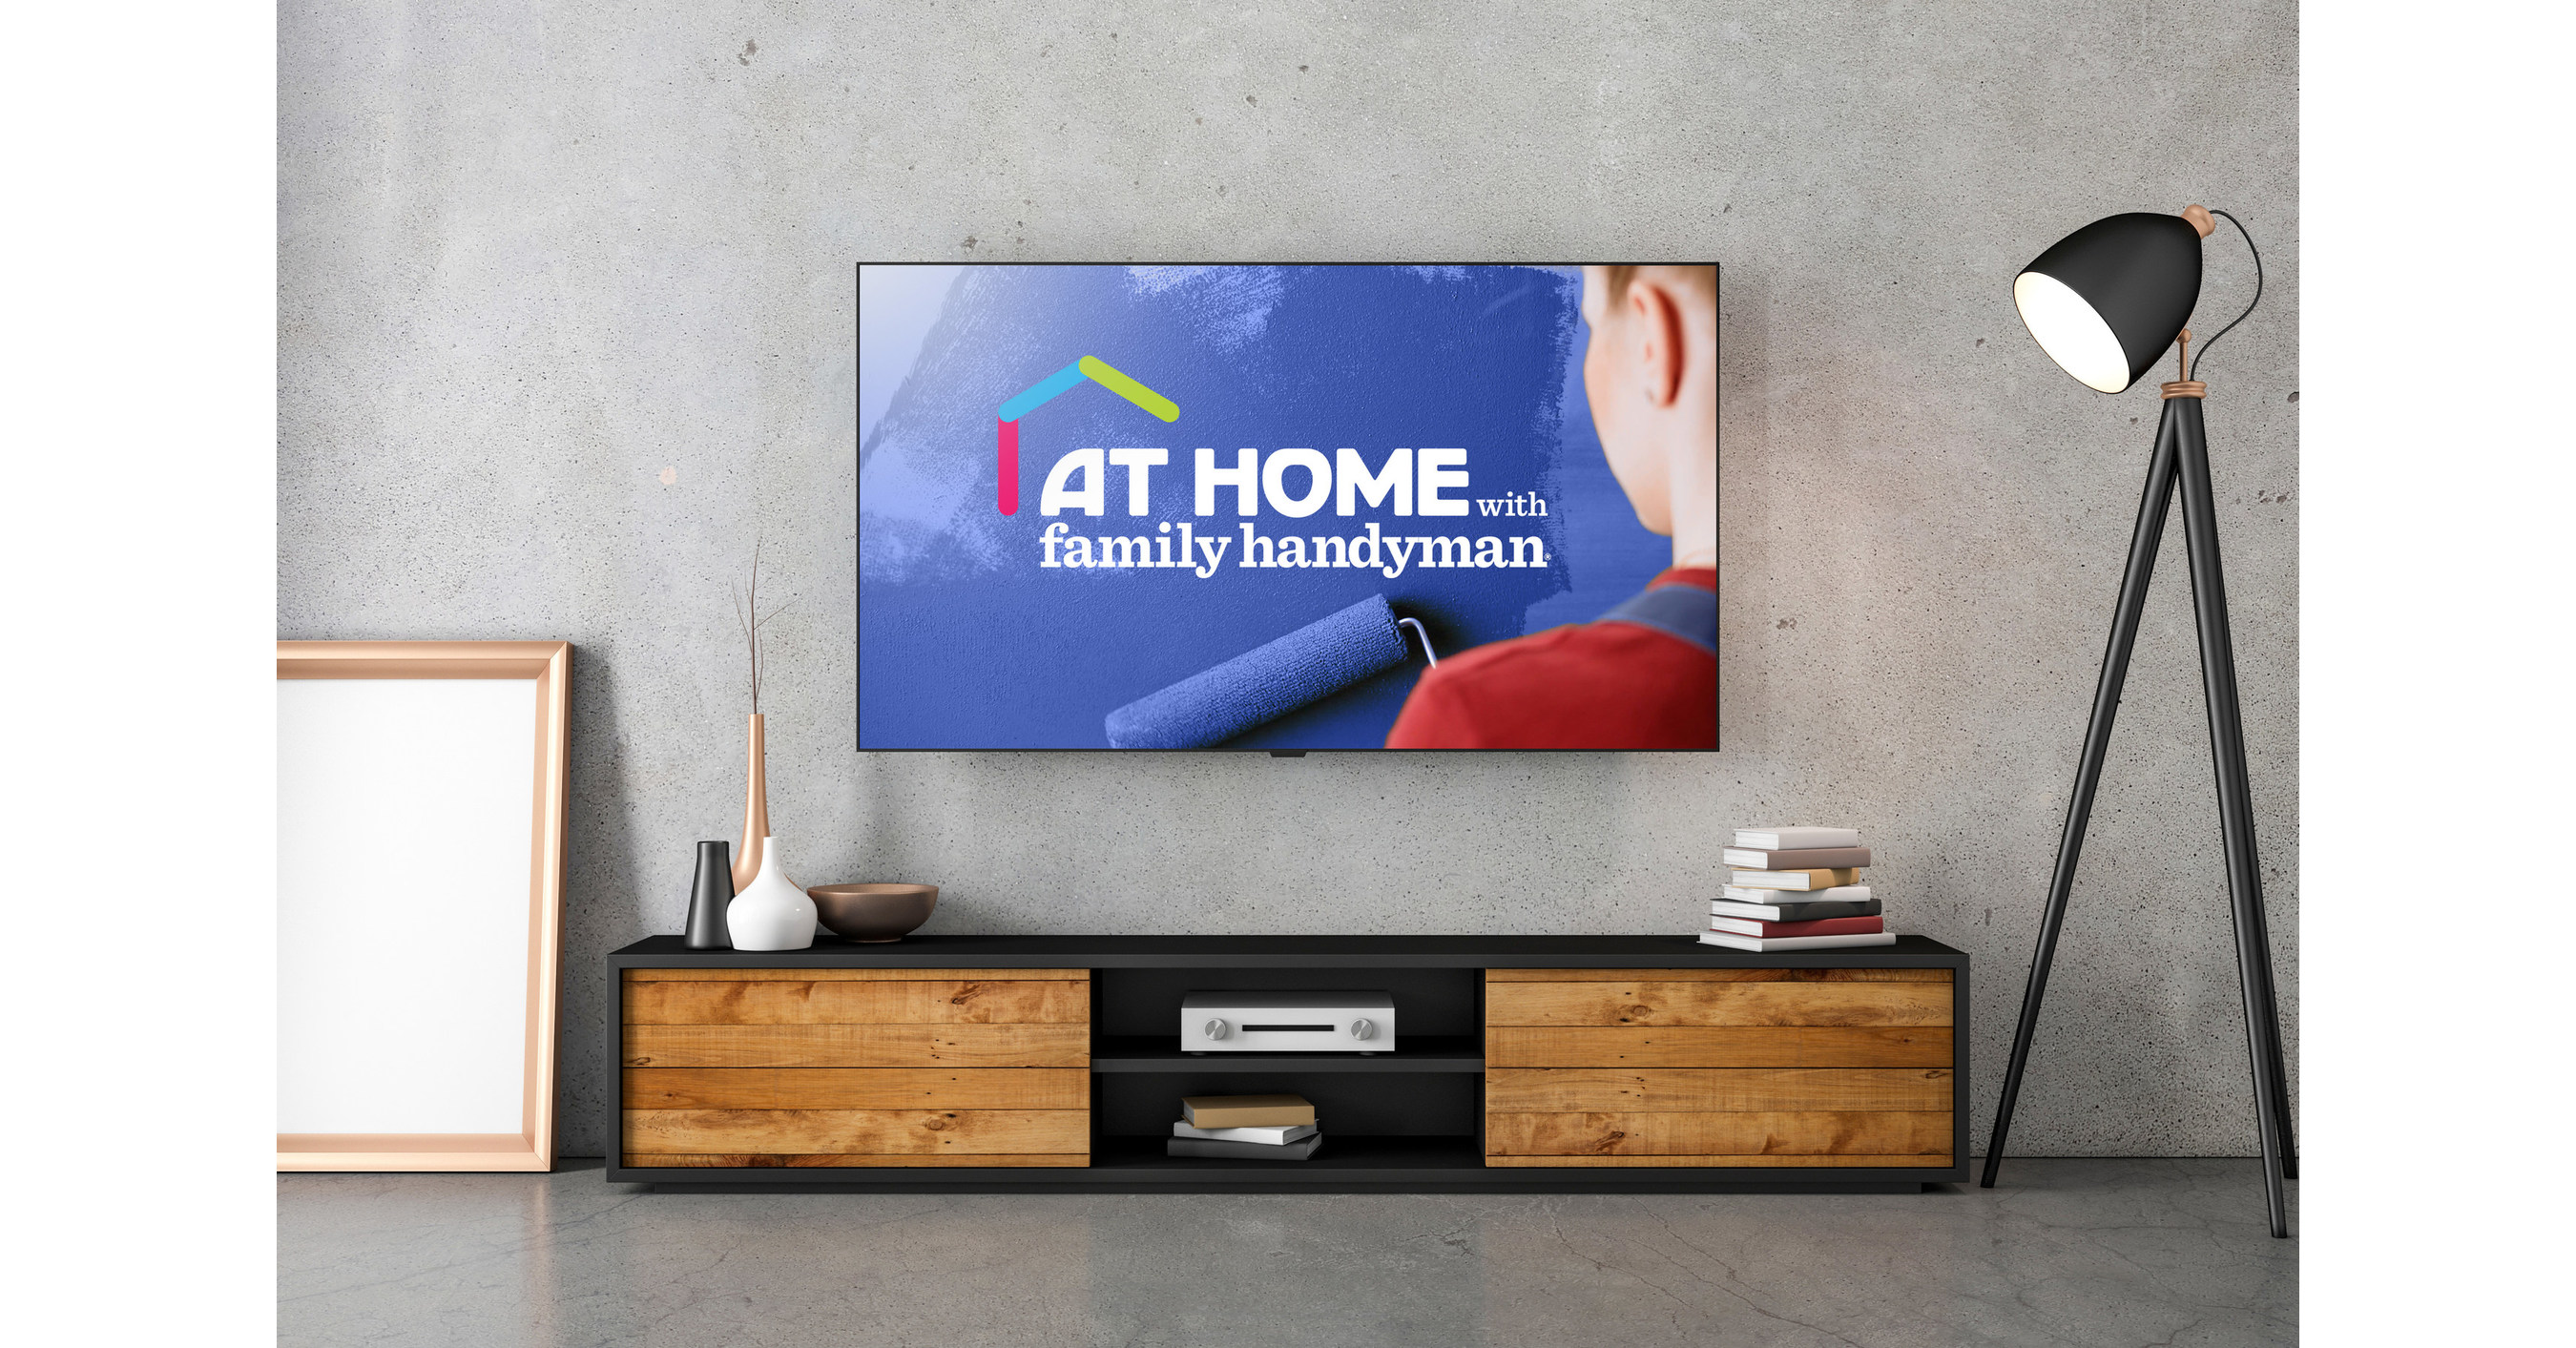 TMB Launches Fifth Streaming Channel ‘At Home with Family Handyman’